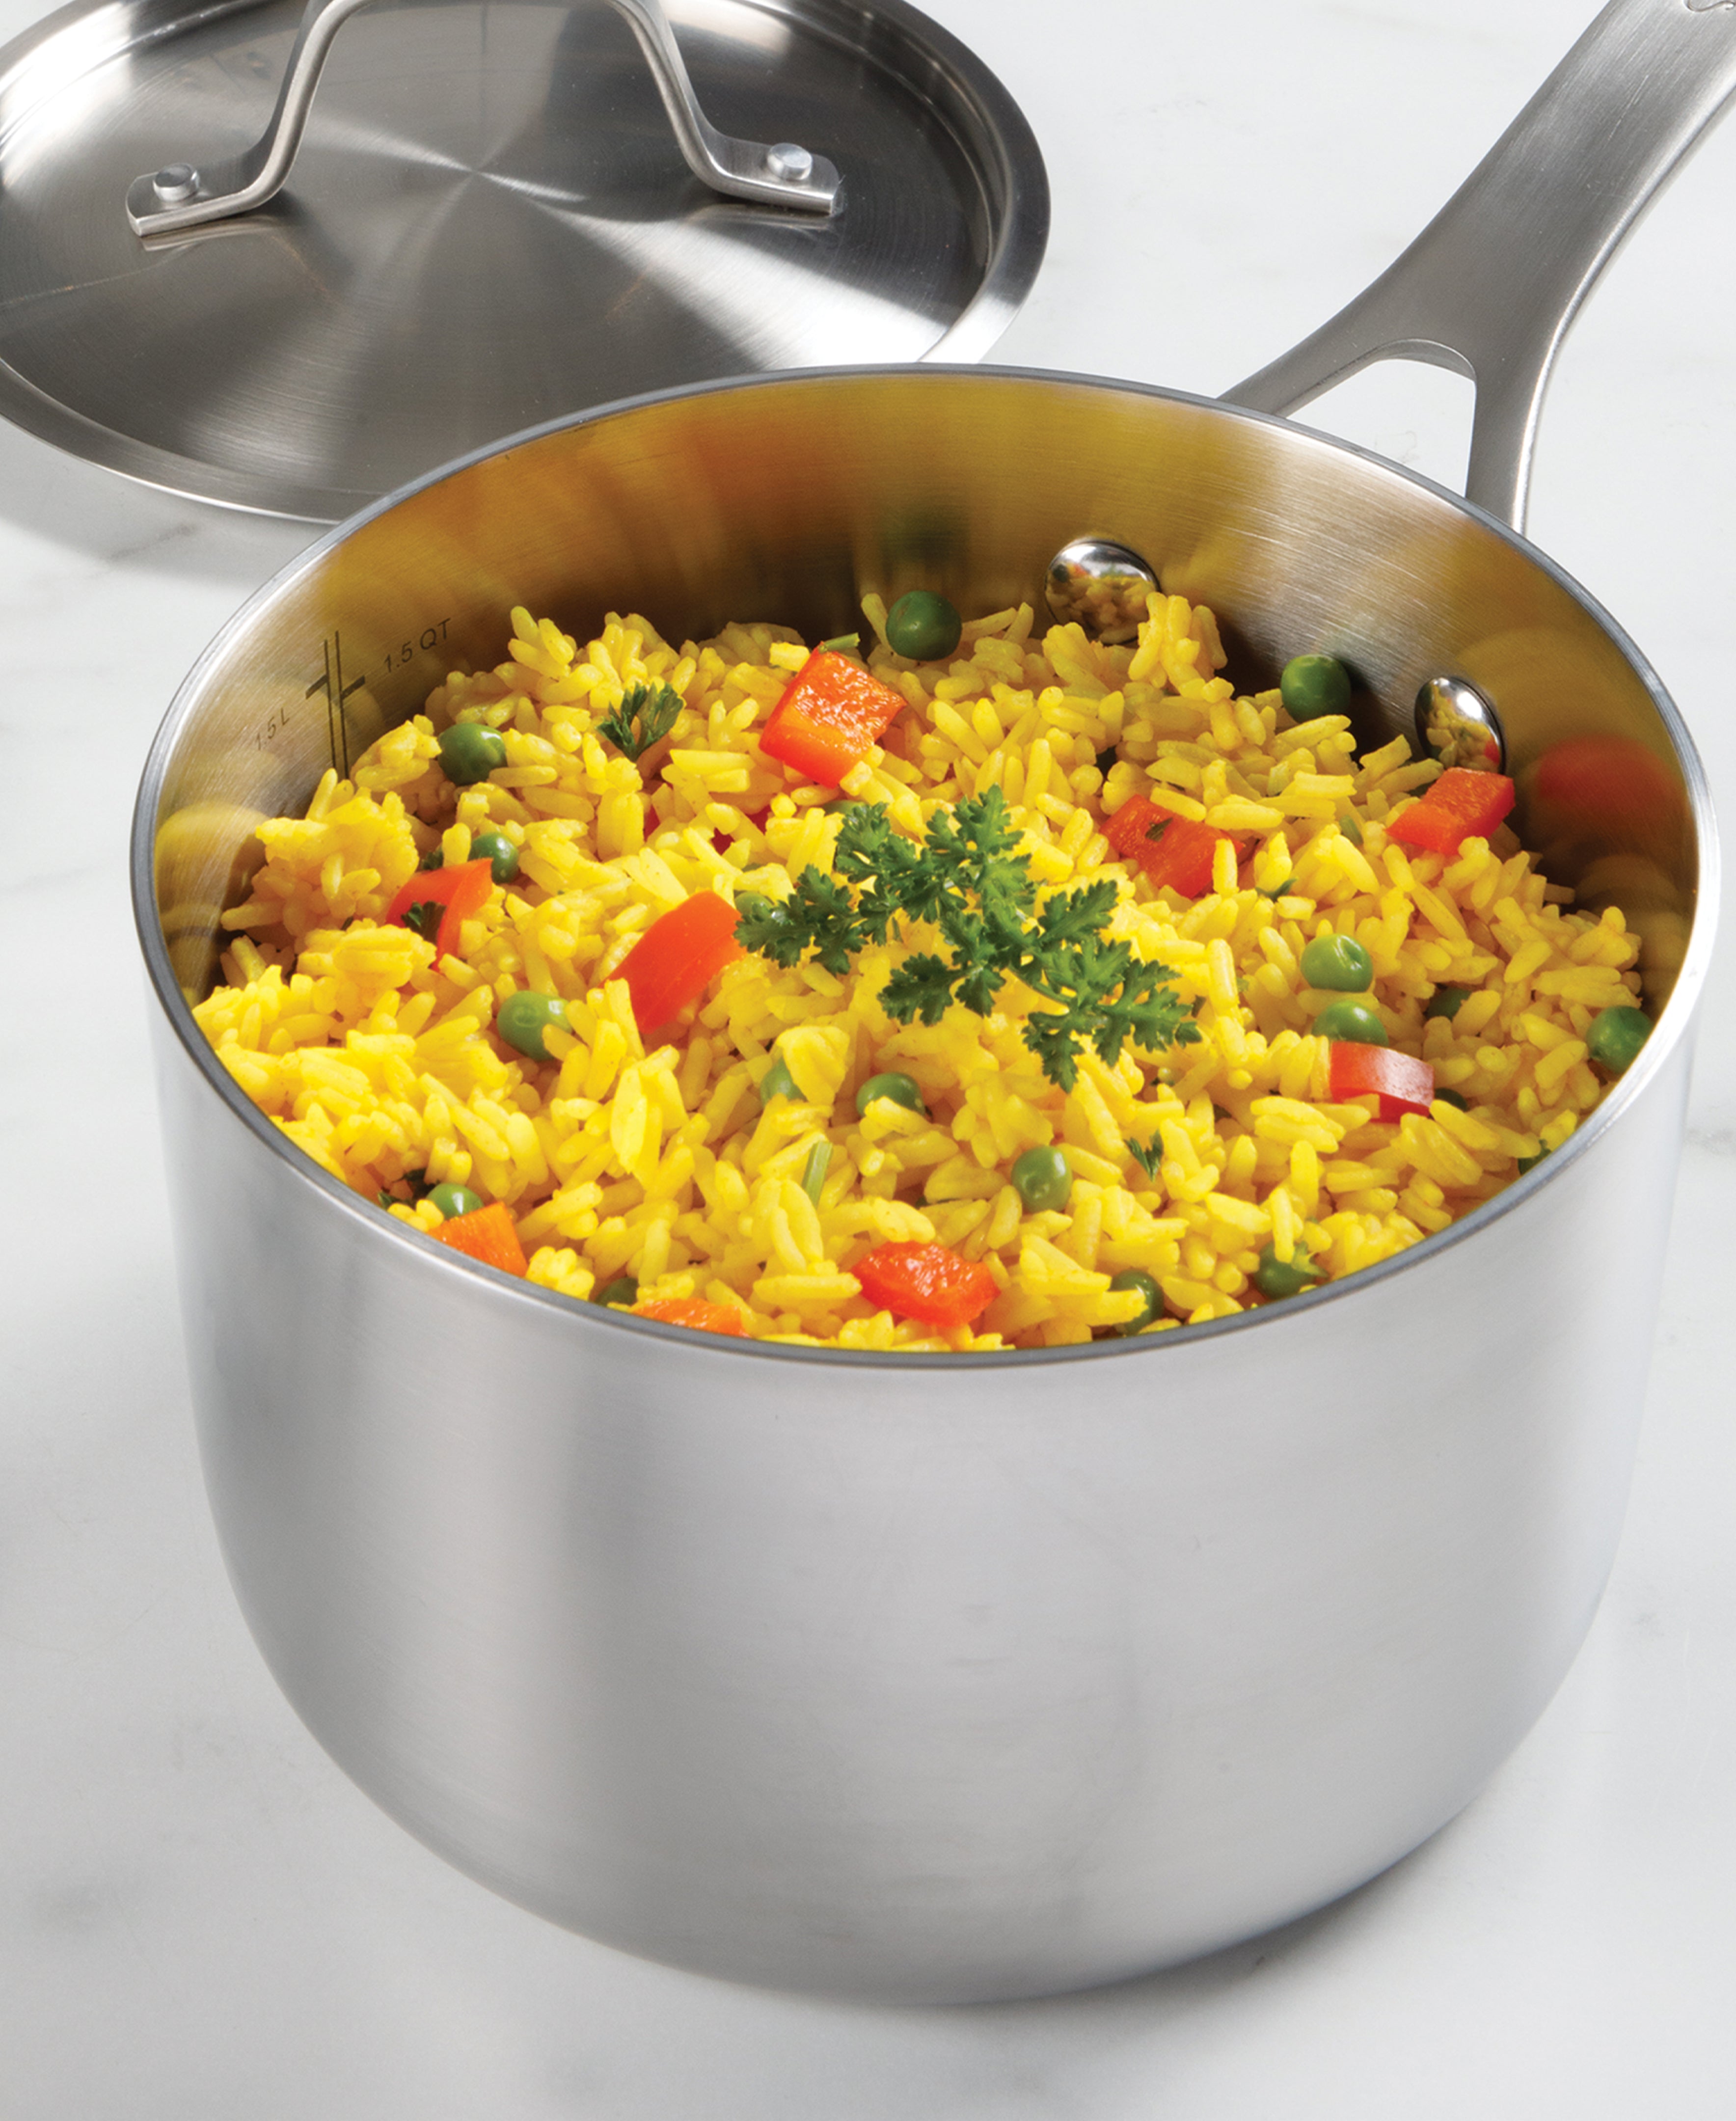 Stainless Steel 3 Quart Saucepan with Cover - Liberty Tabletop